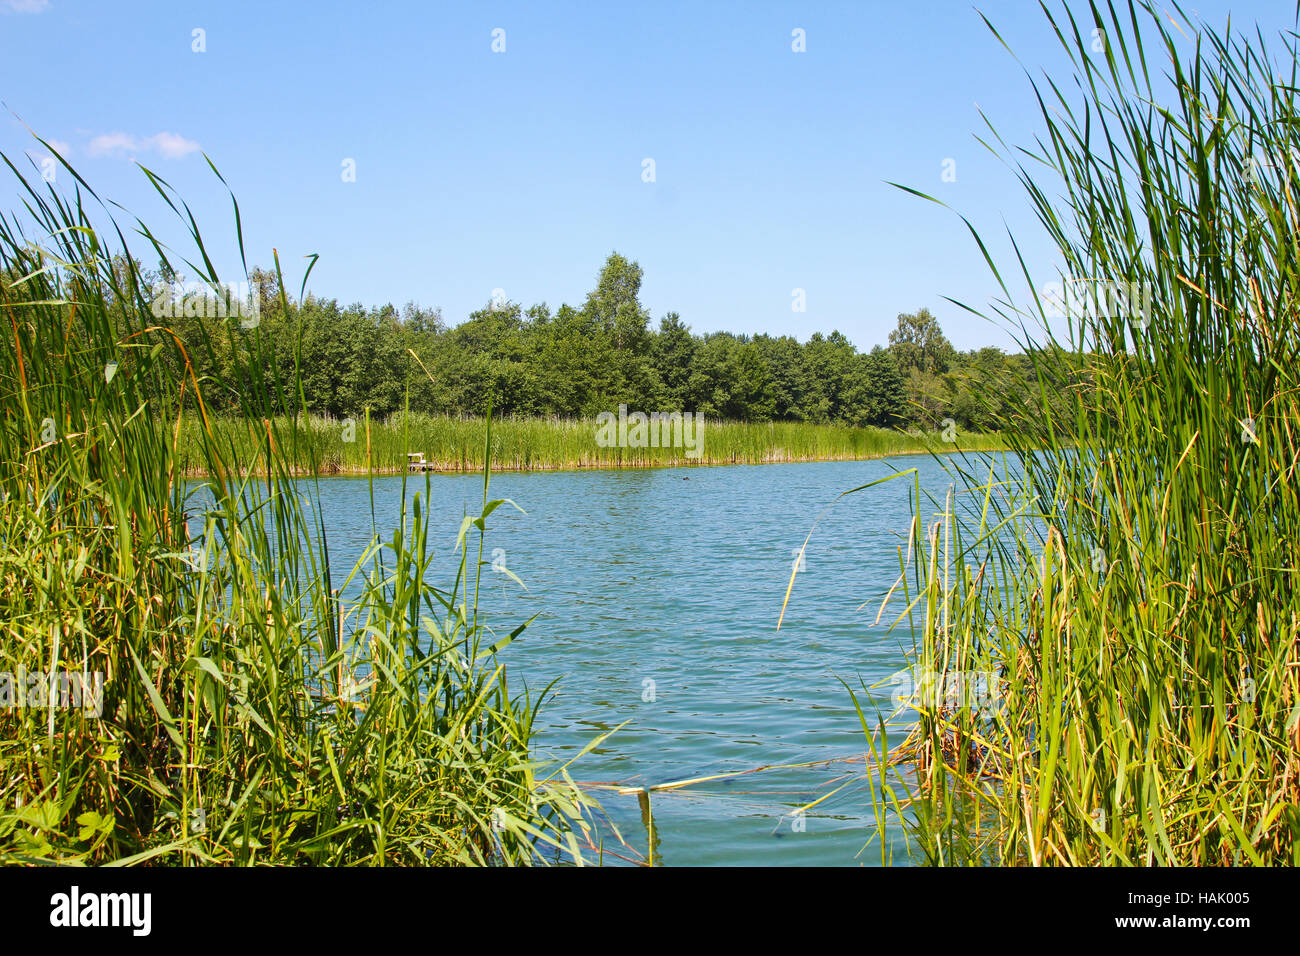 pond and water plants at summer day Stock Photo